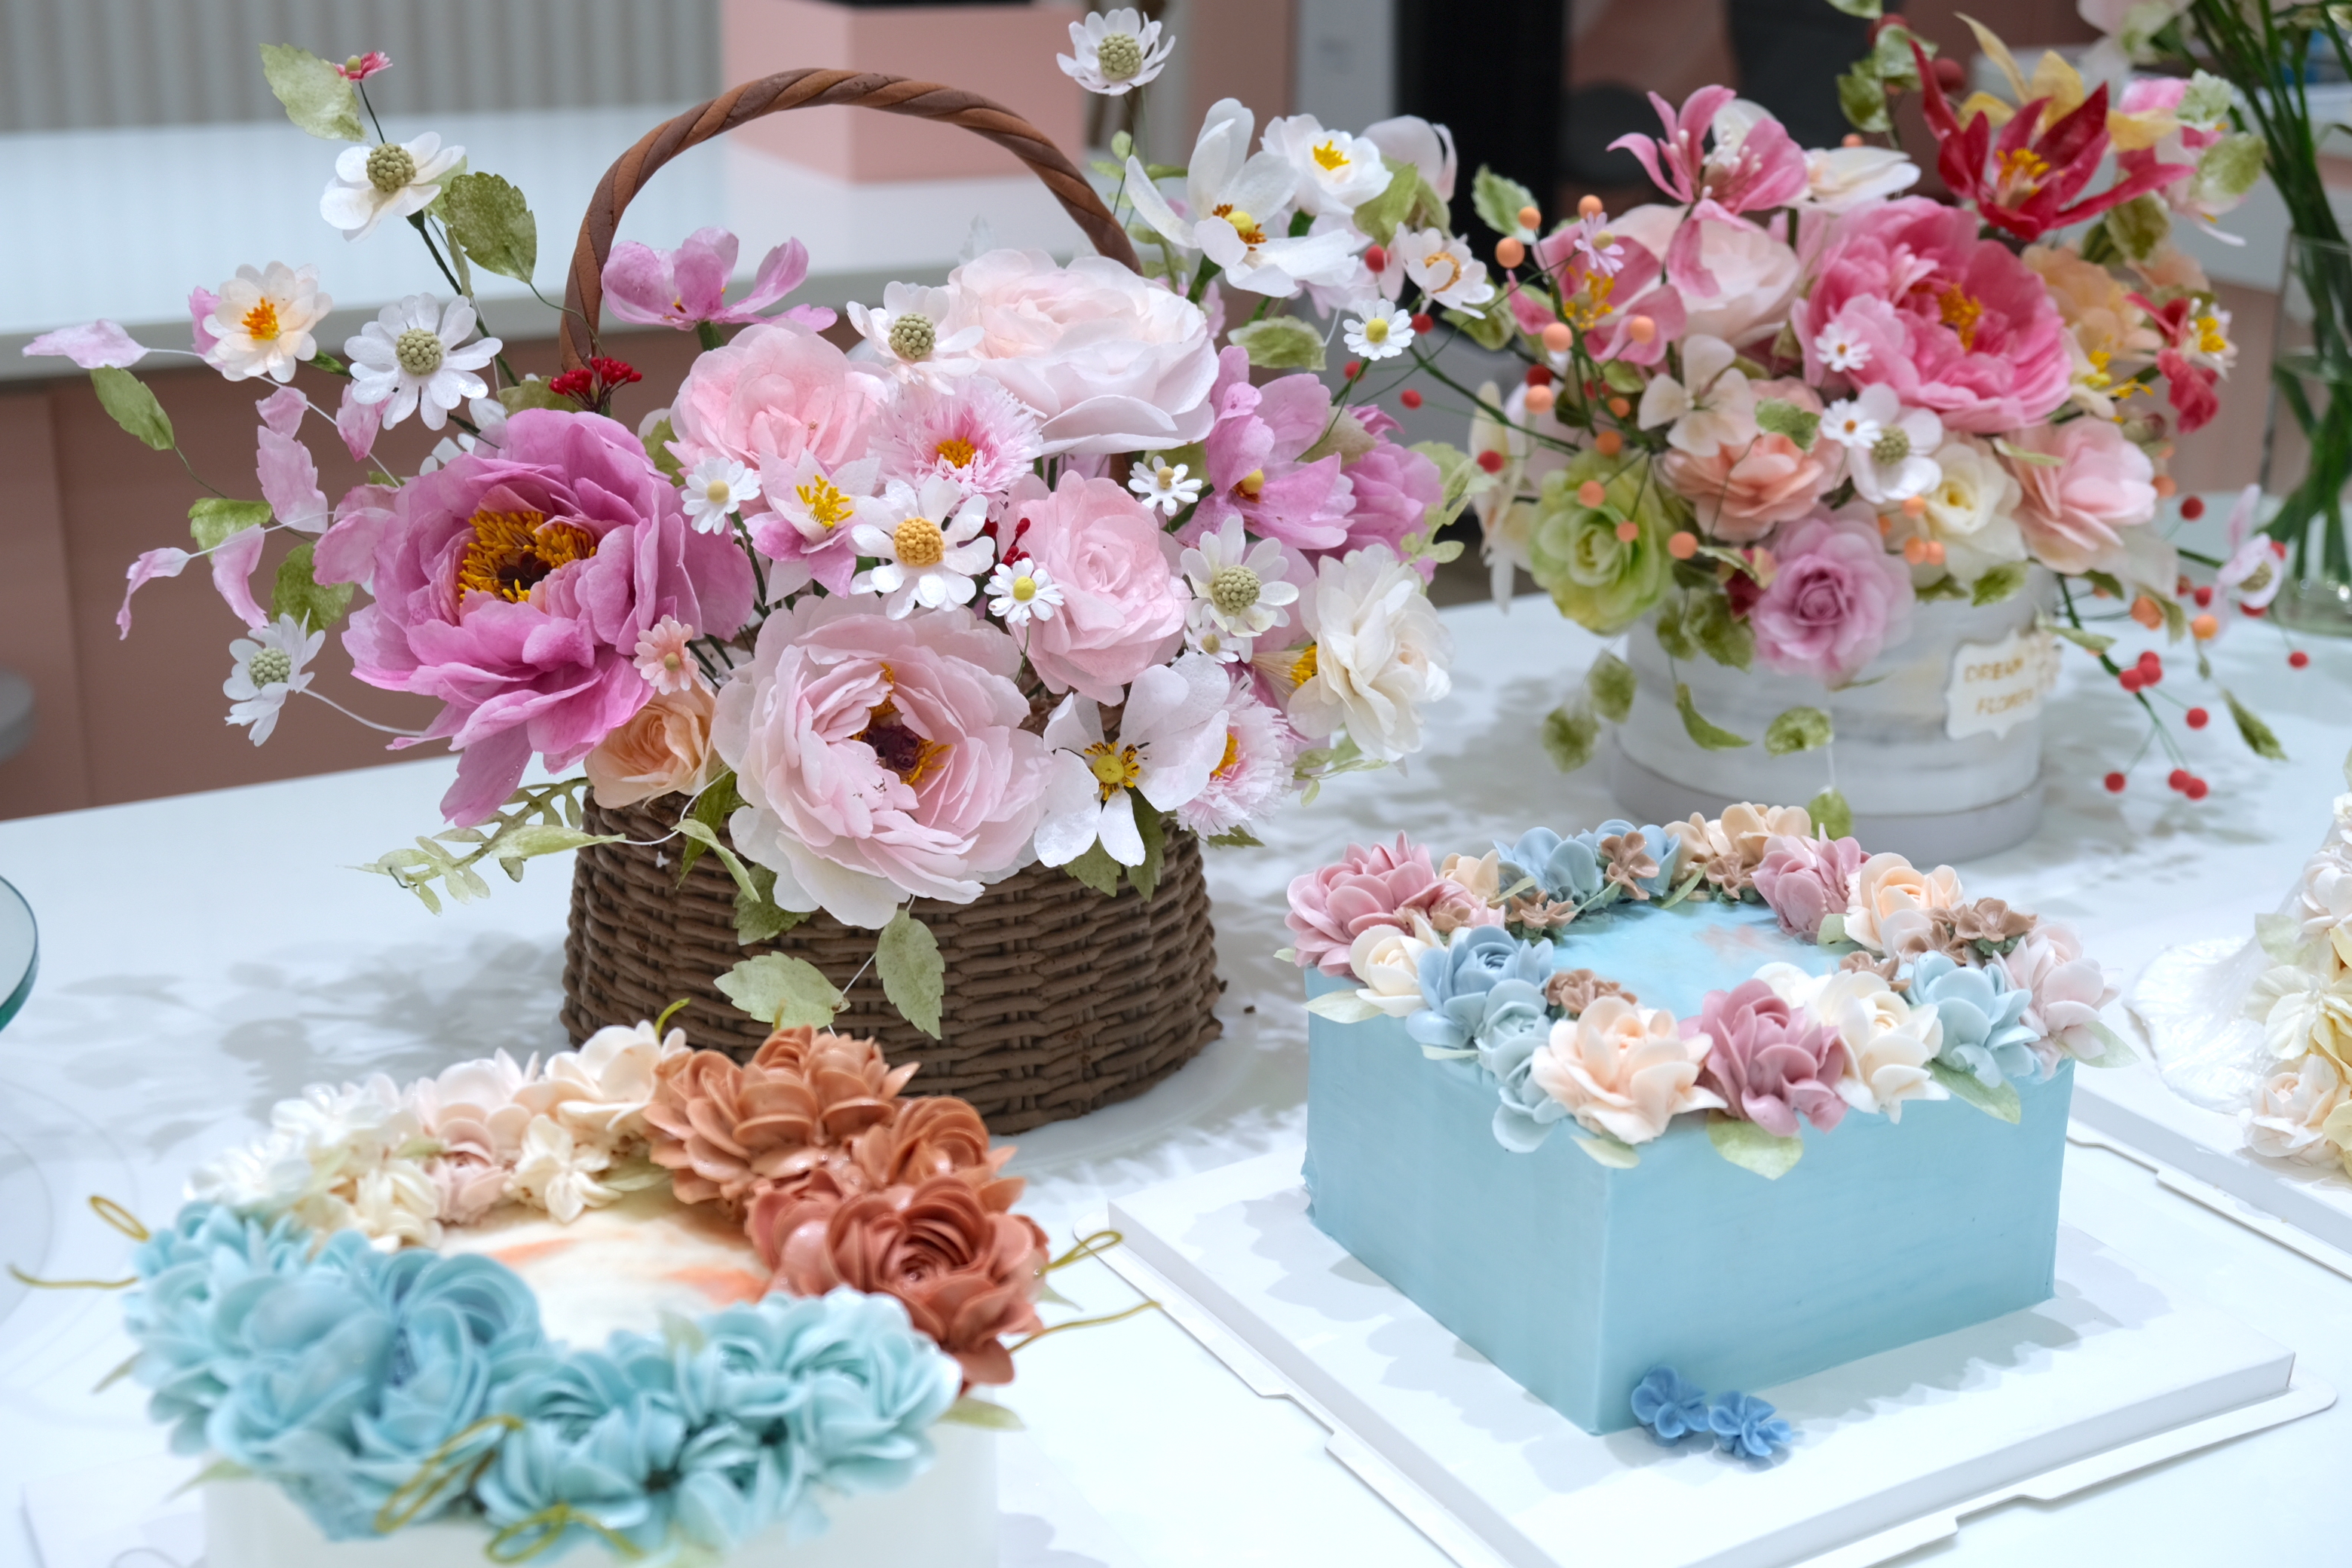 Floral cakes made by Tran Thanh Thanh. Photo: Ngoc Phuong / Tuoi Tre News